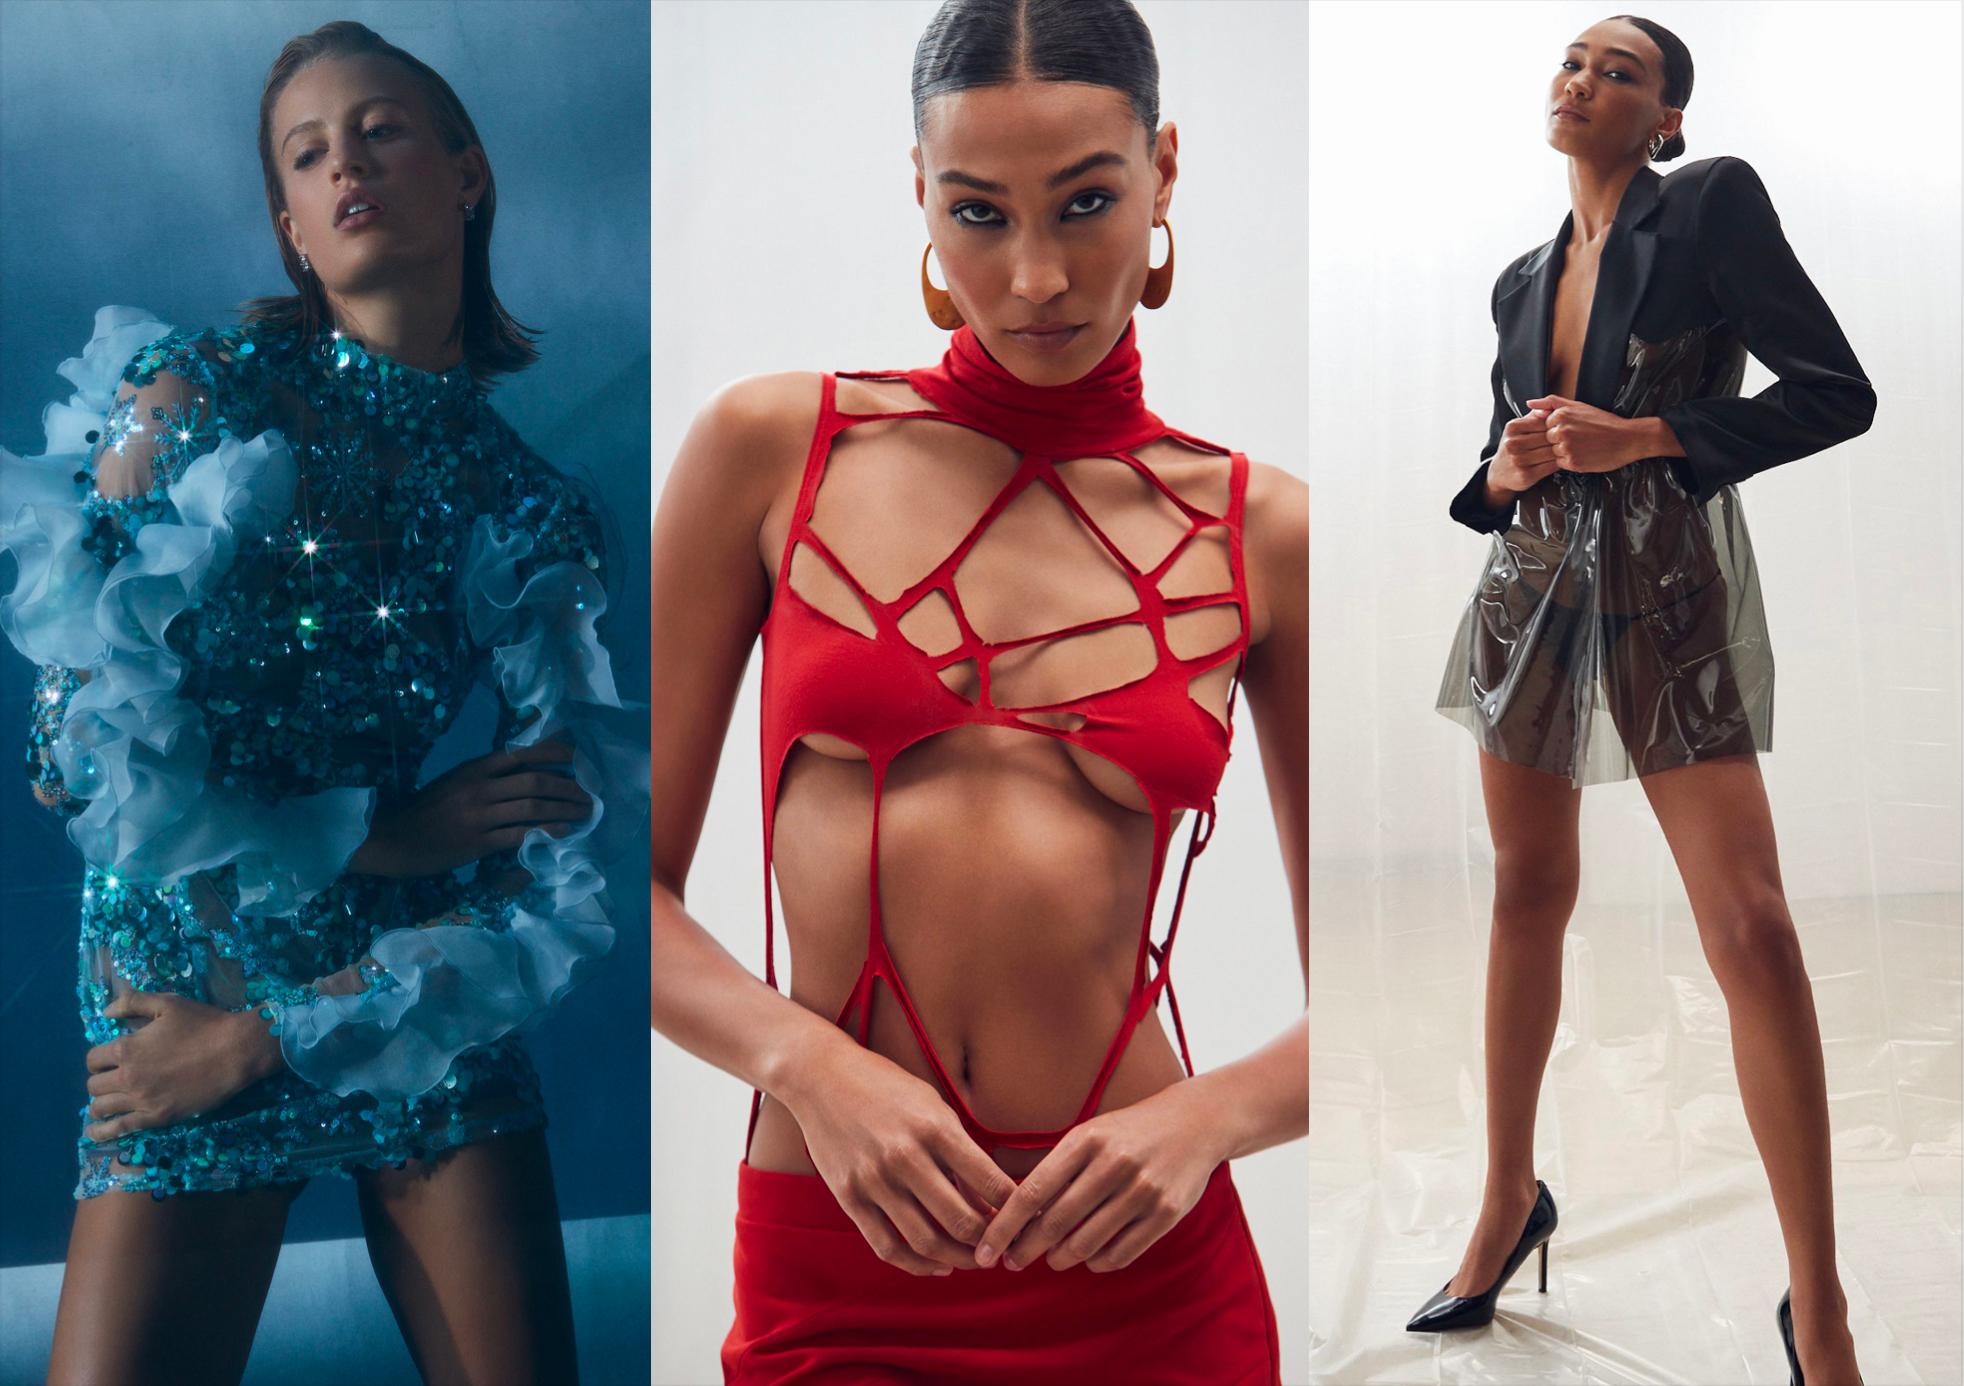 Revolve dropped its first collection of physical garments based on designs from the winners of AI Fashion Week in November. Photo: Revolve